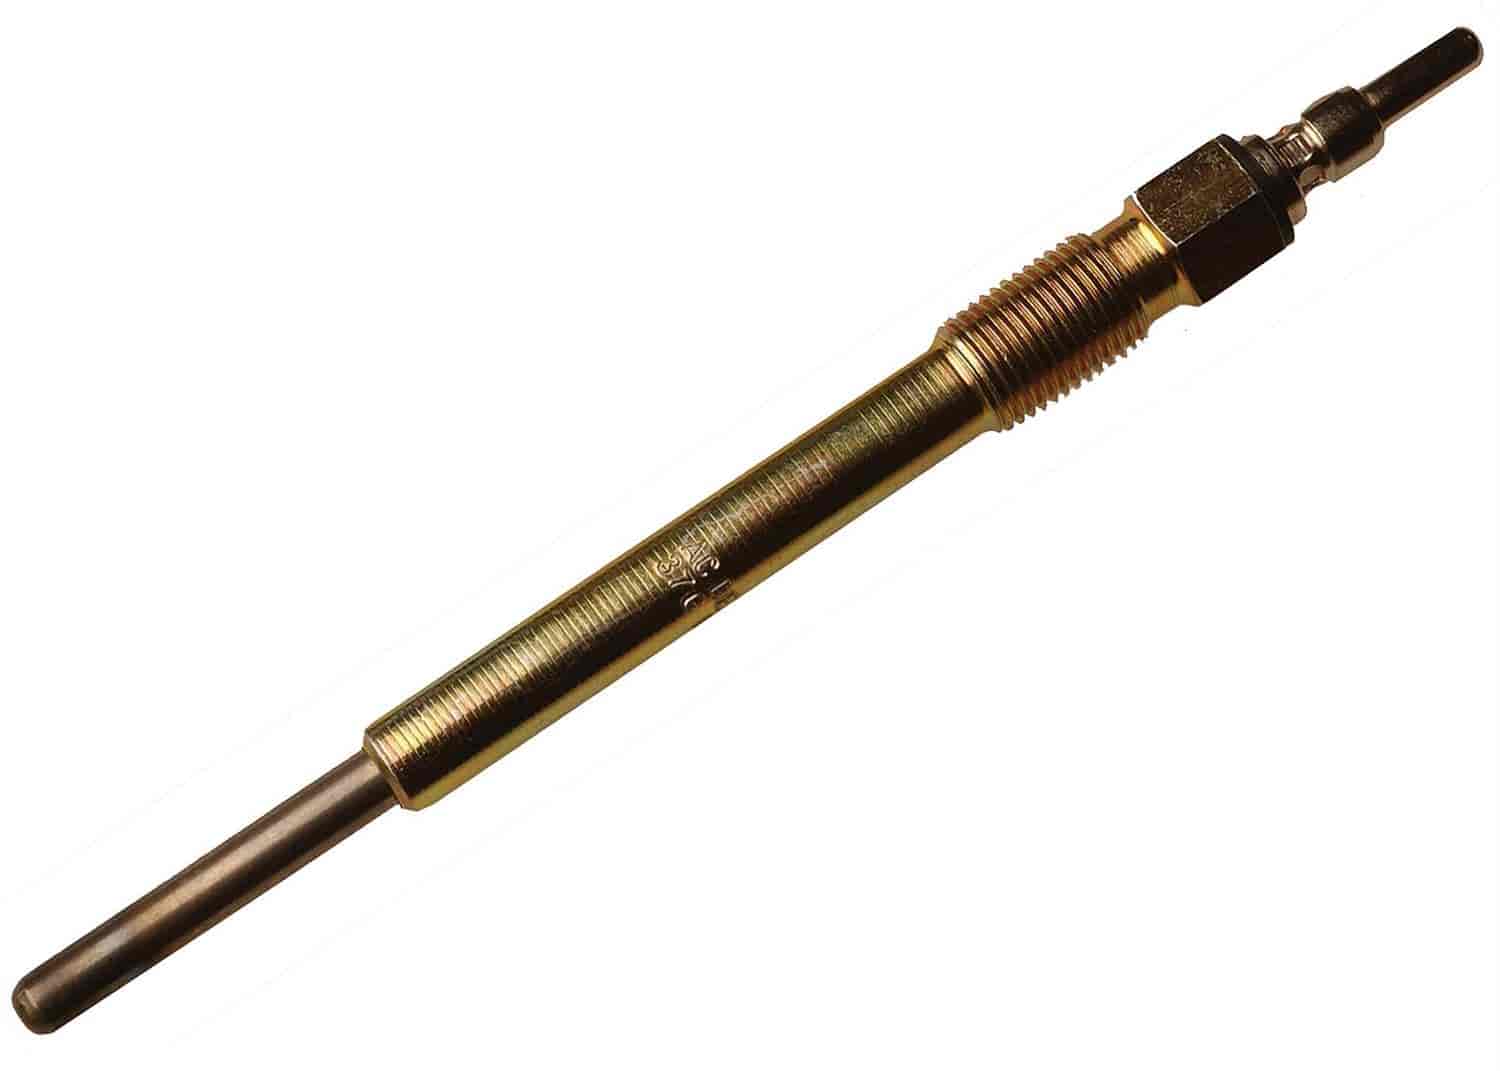 37G Glow Plug for Ford 7.3L Powerstroke Diesel Engines